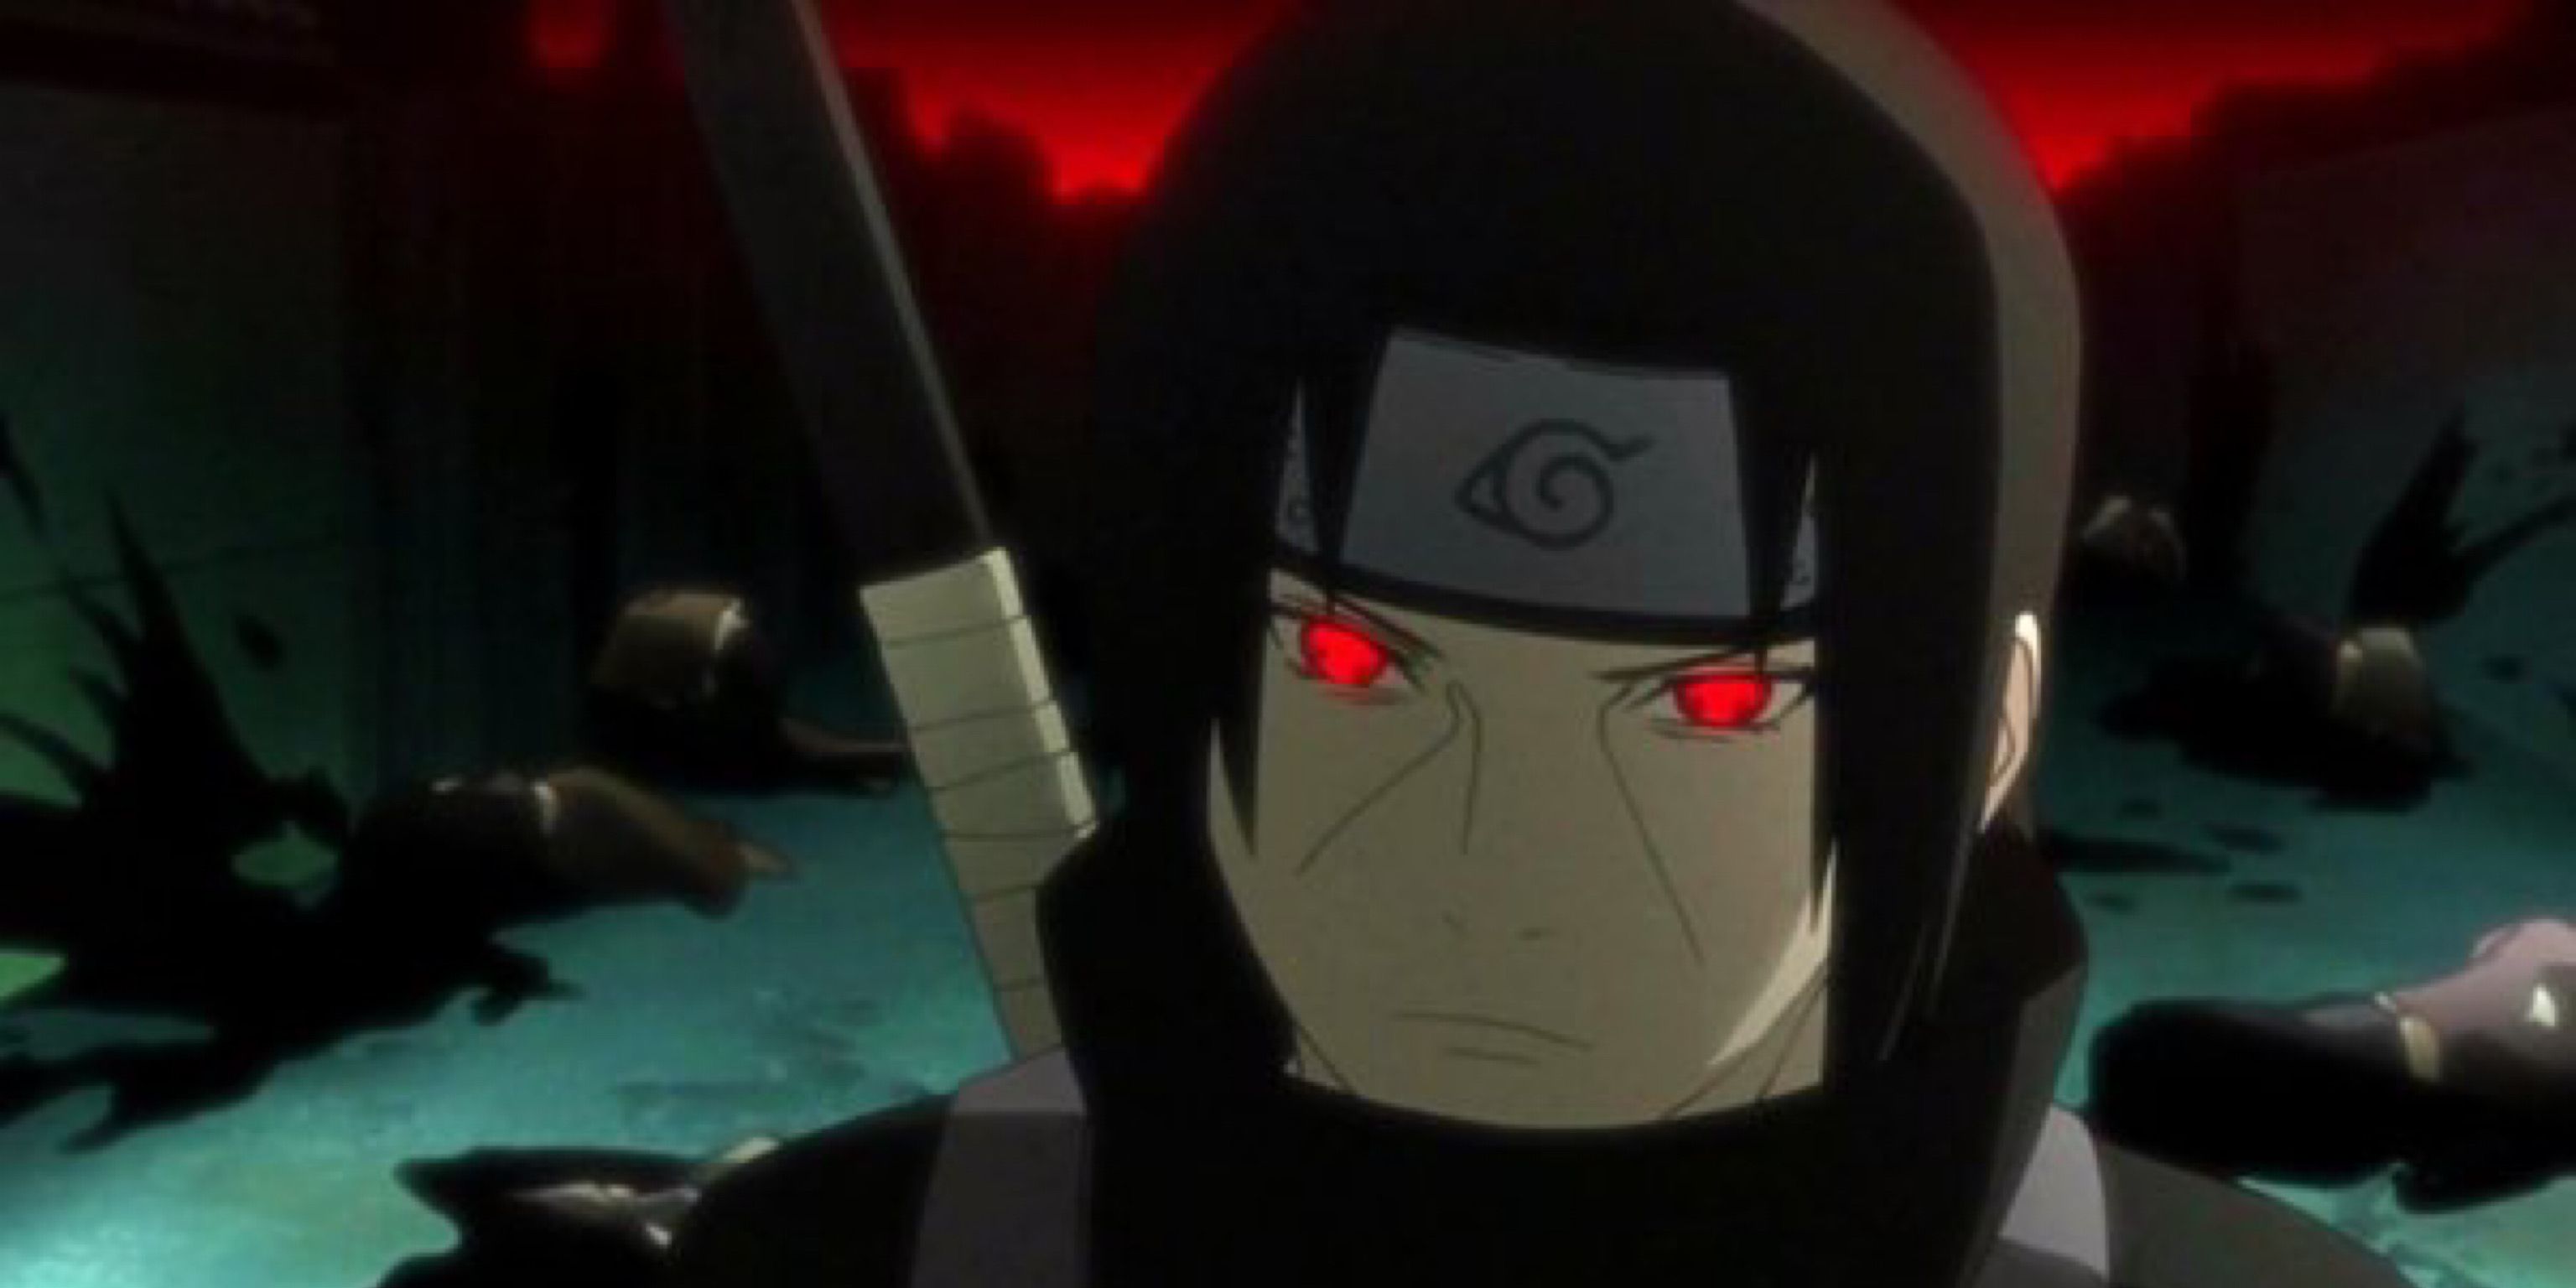 Itachi aids in the slaughter of his clan in Naruto.